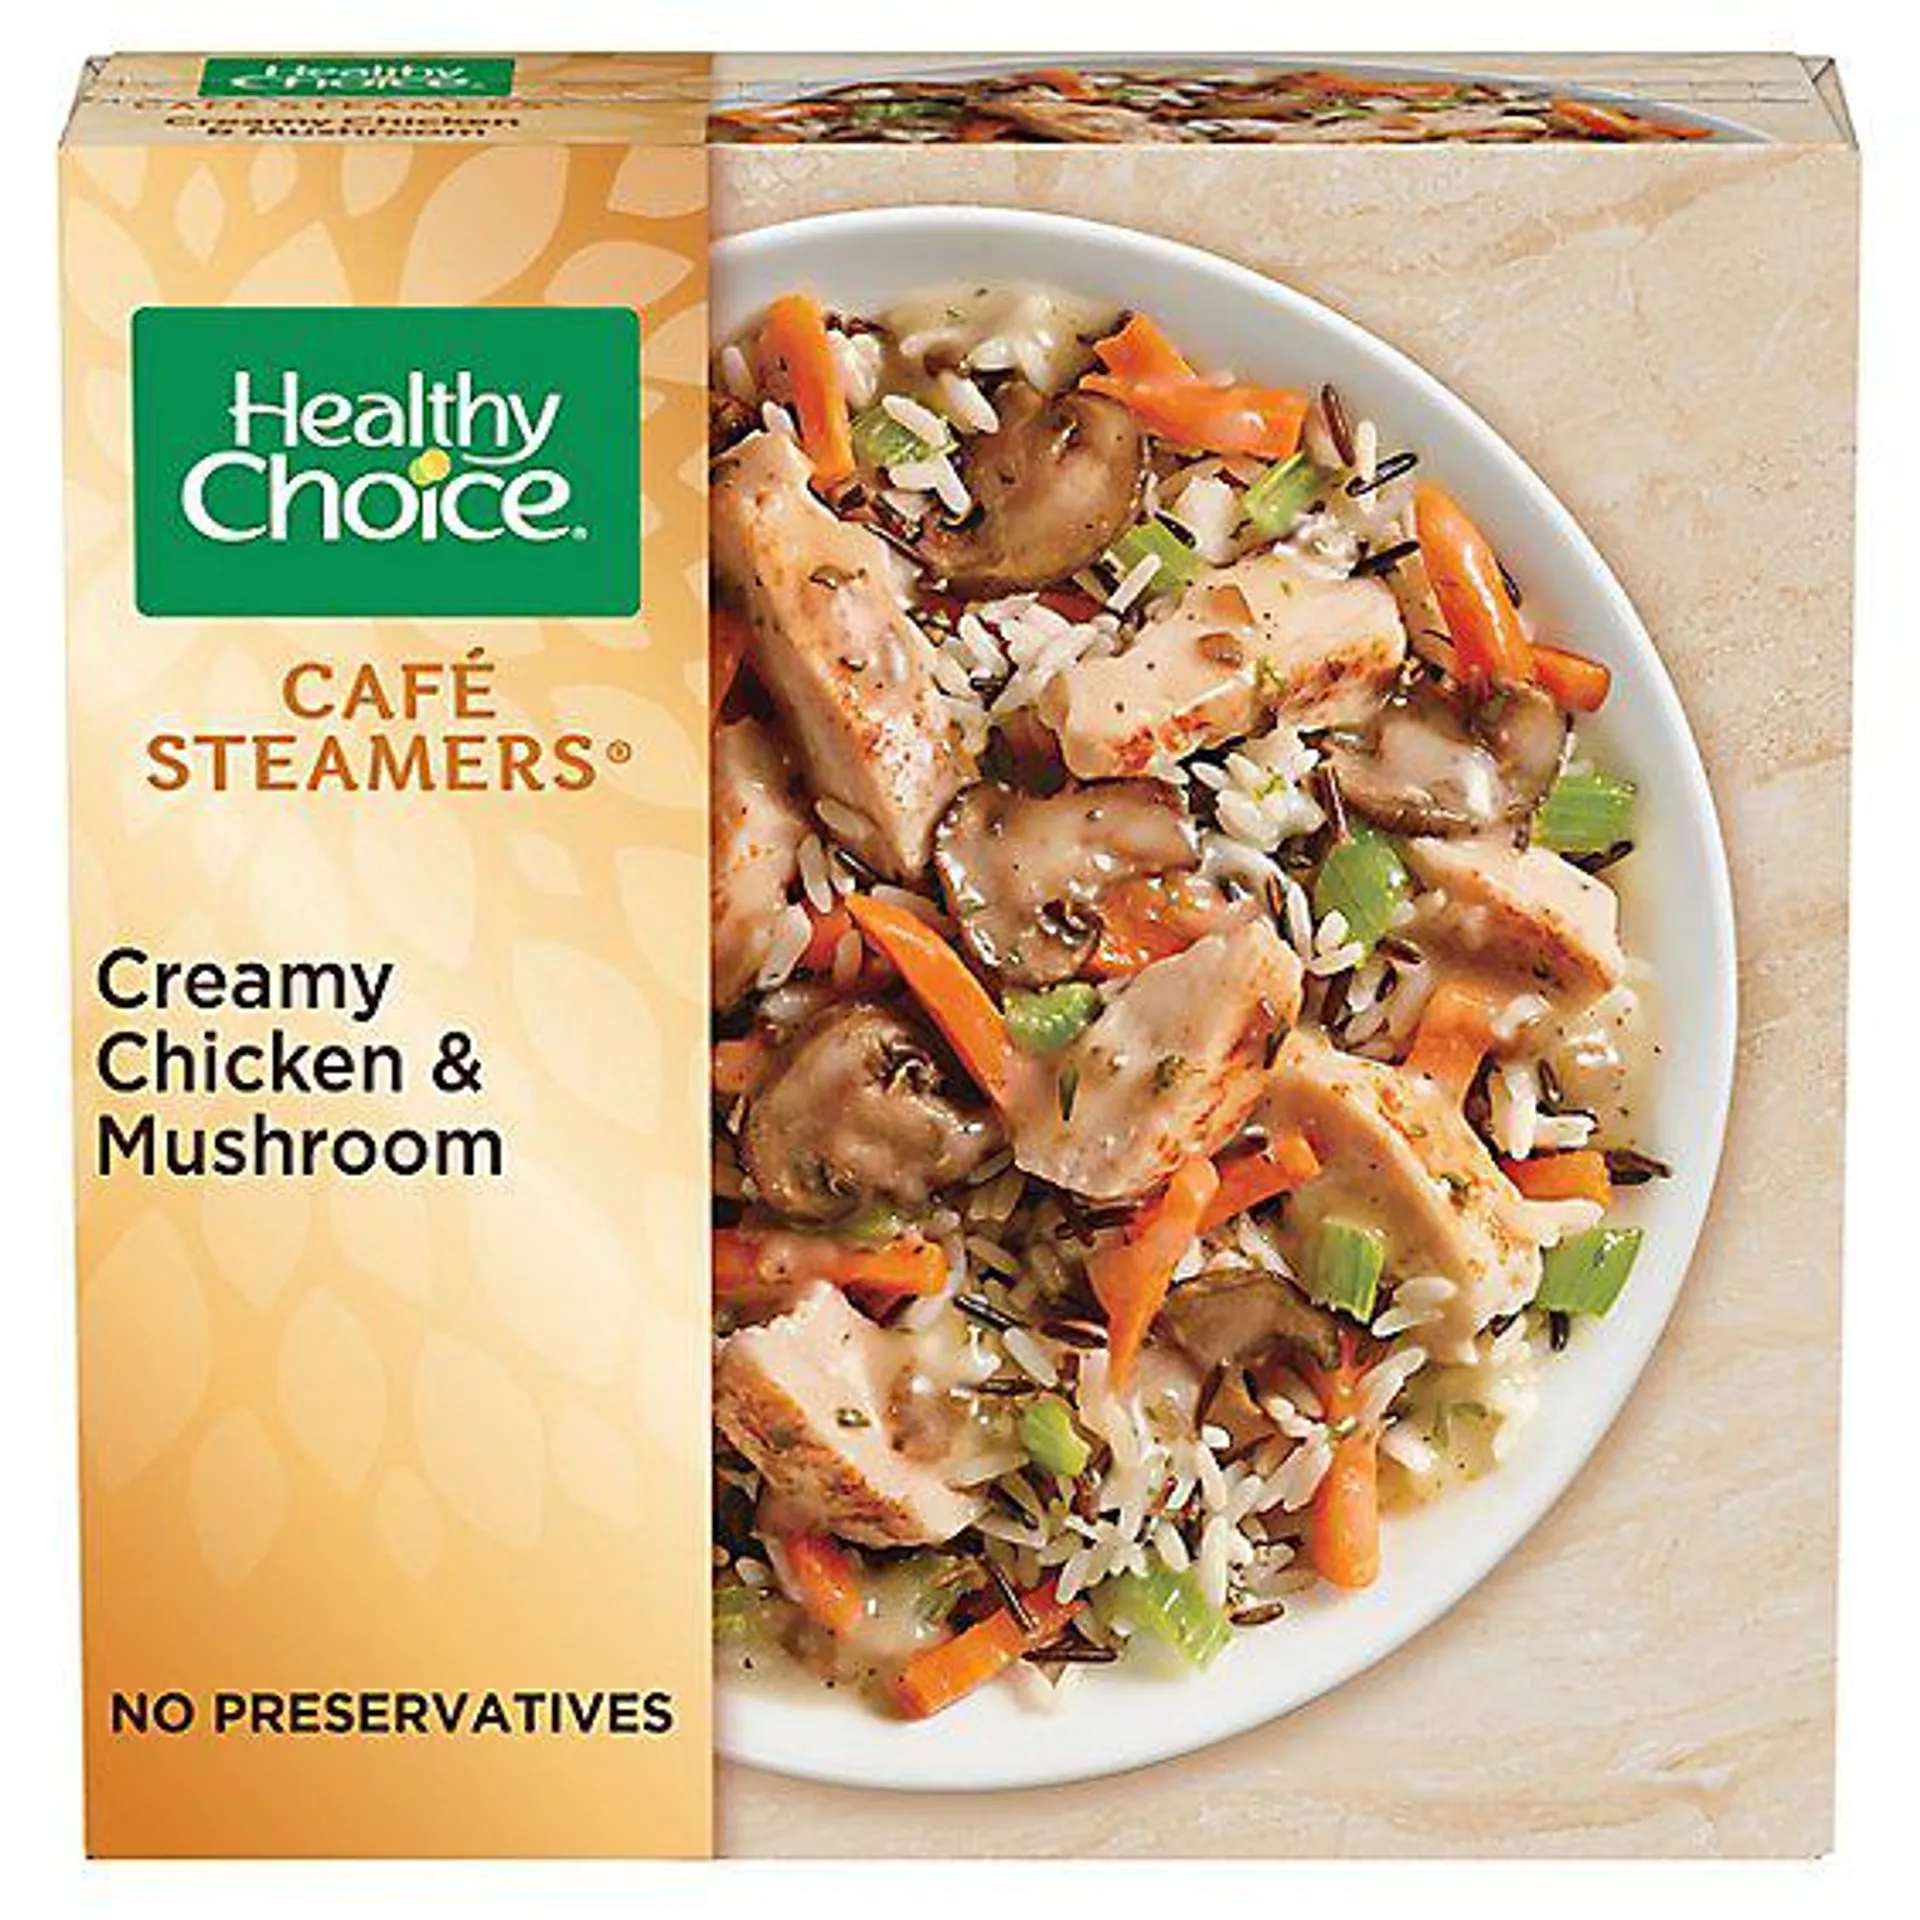 Healthy Choice Cafe Steamers Creamy Chicken Mushroom Frozen Meal - 9.25 Oz